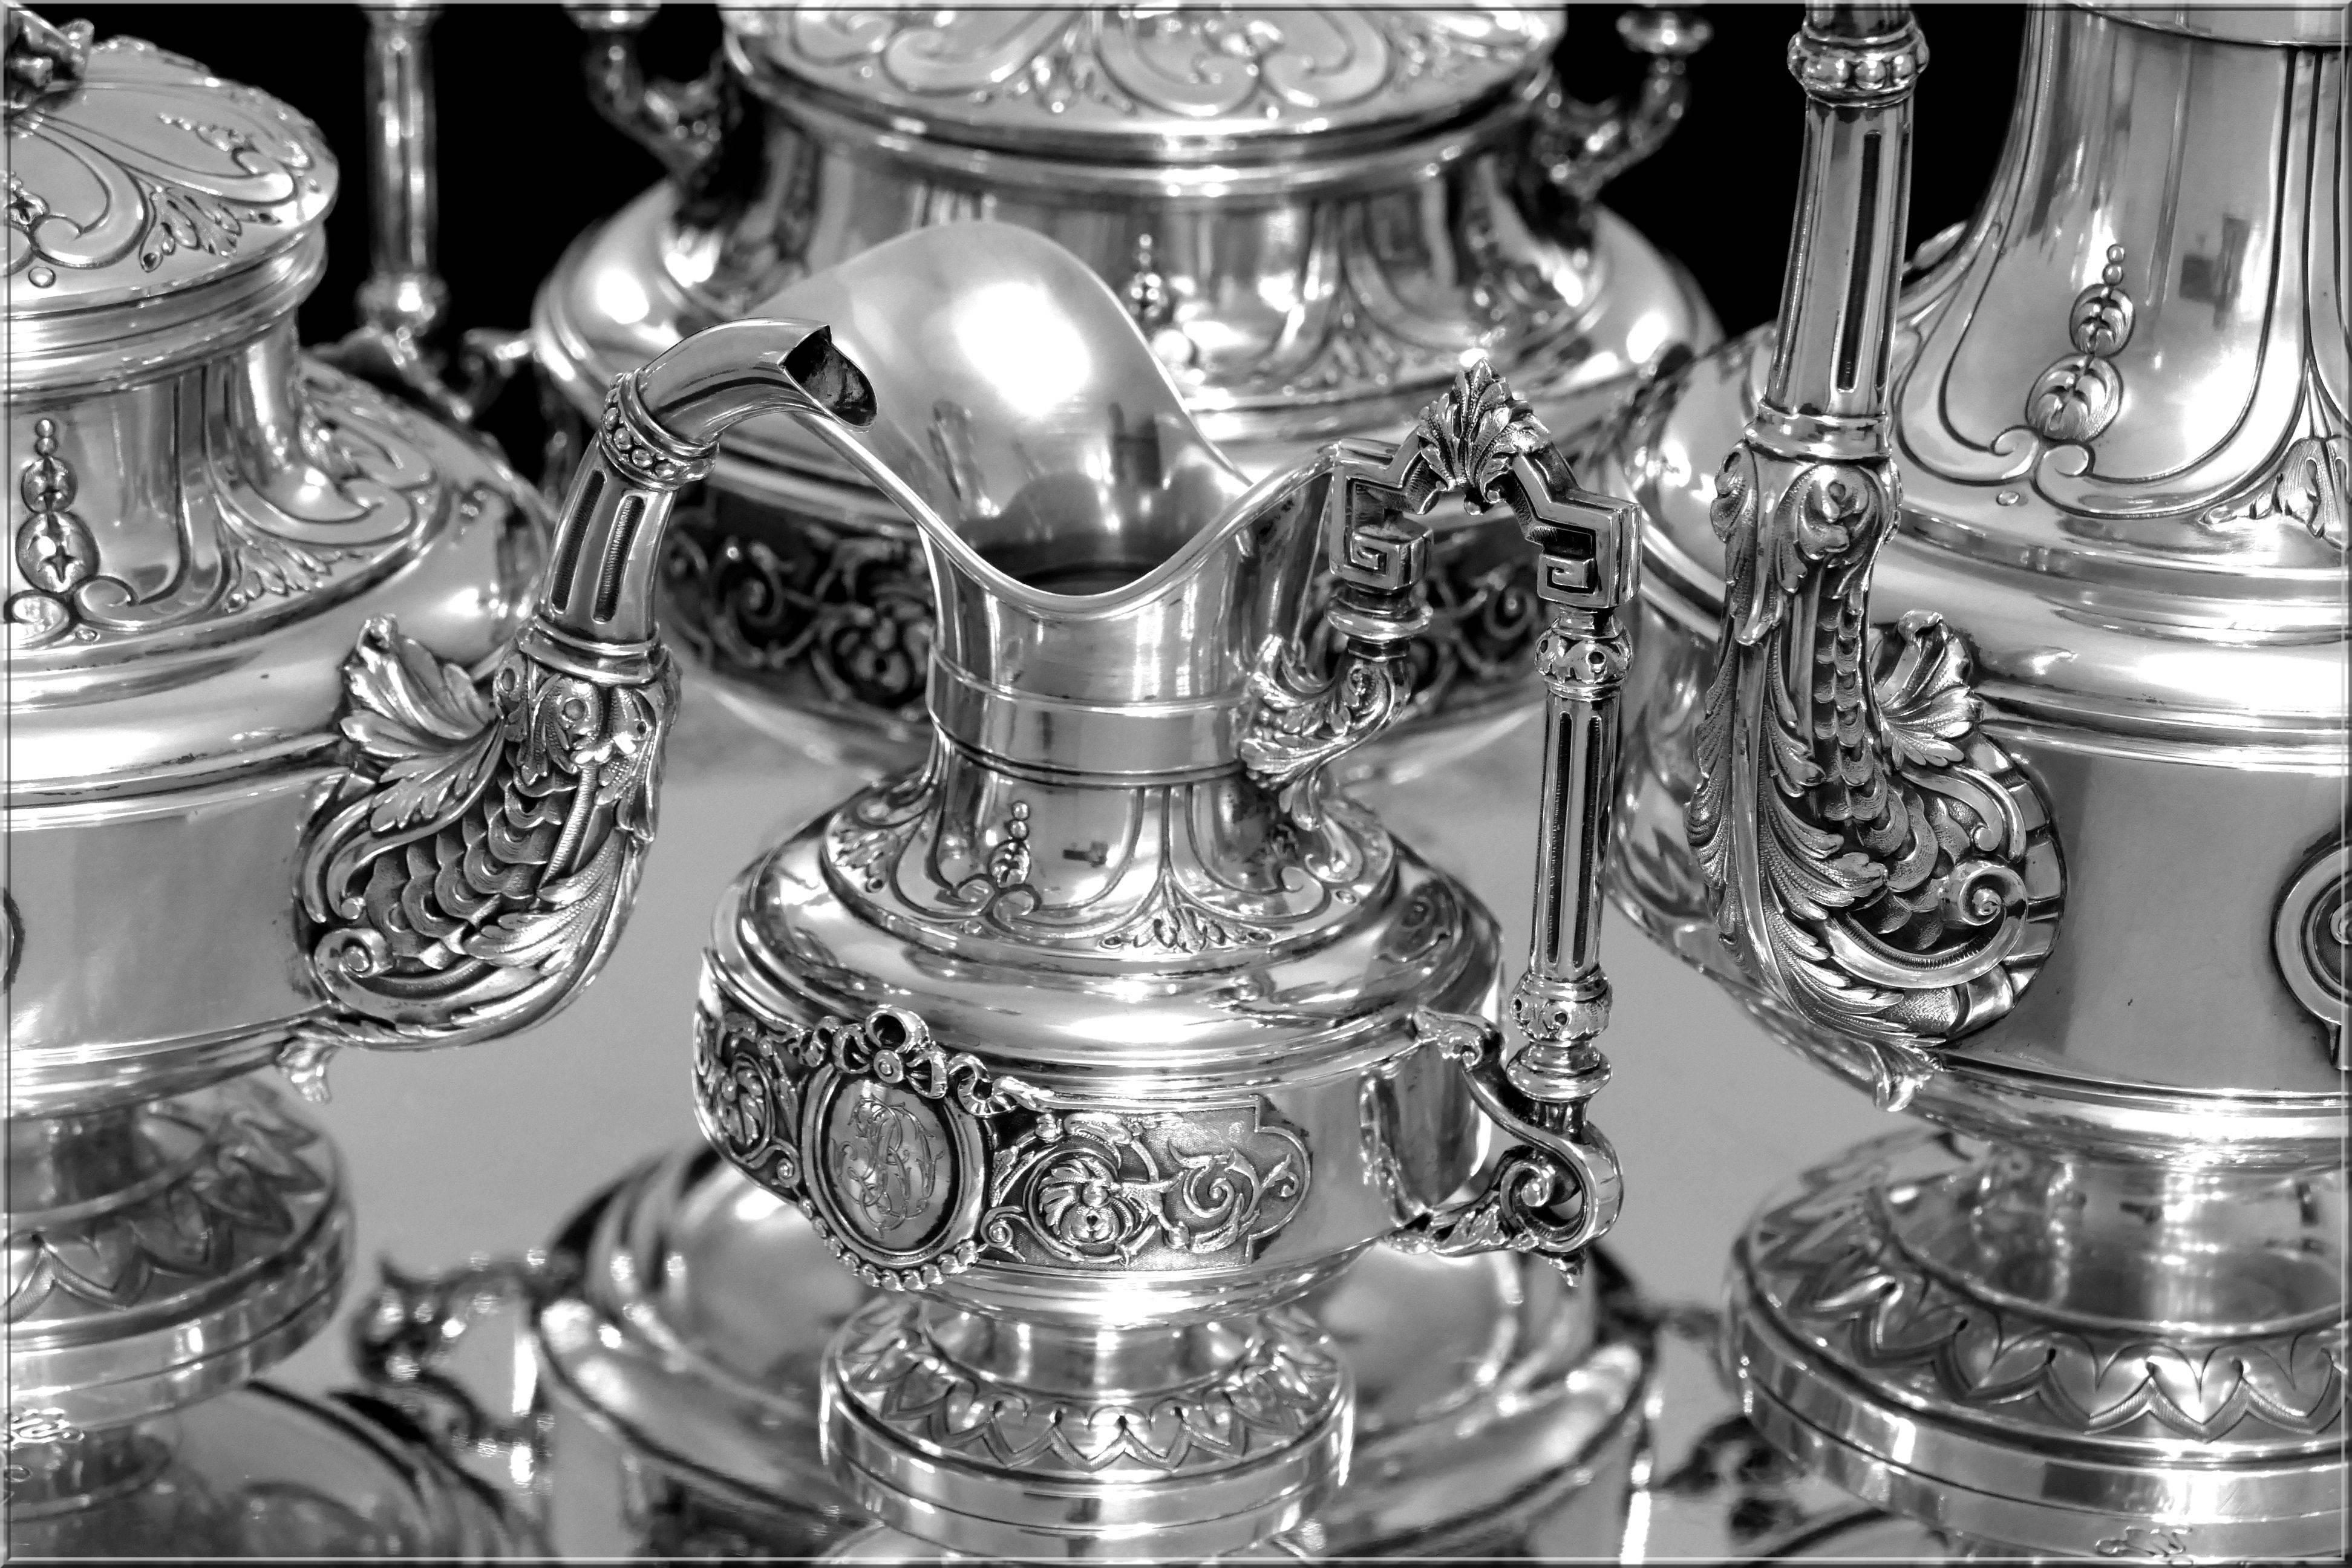 Boulenger Fabulous French All Sterling Silver Tea & Coffee Service 5 pc Putti 1